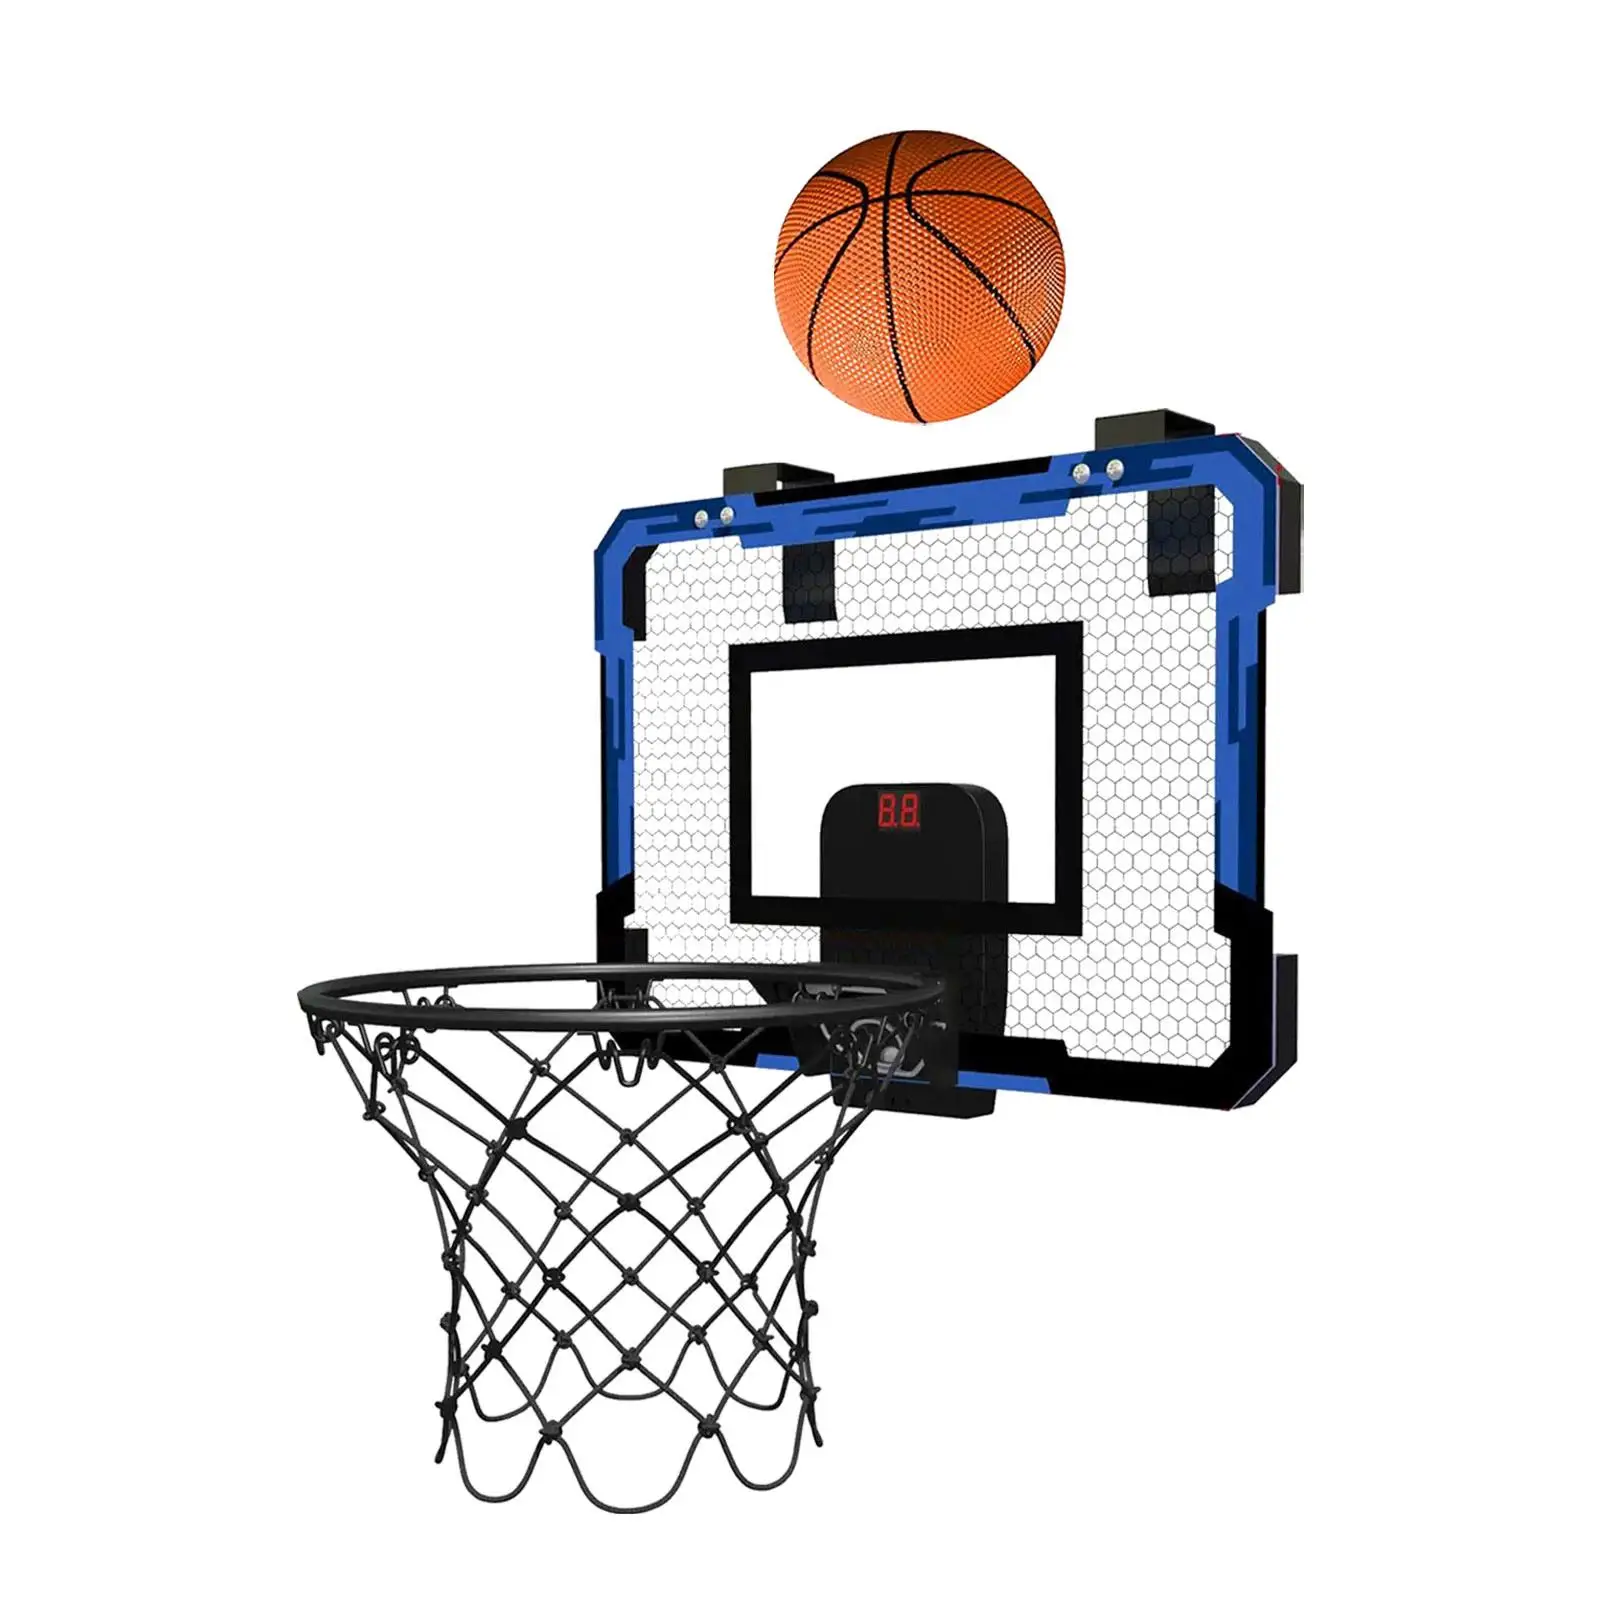 Basketball Hoop Basketball Toys with Pump Attachment Basketball System Door Room Basketball Hoop for Outdoor Indoor Boys Kids